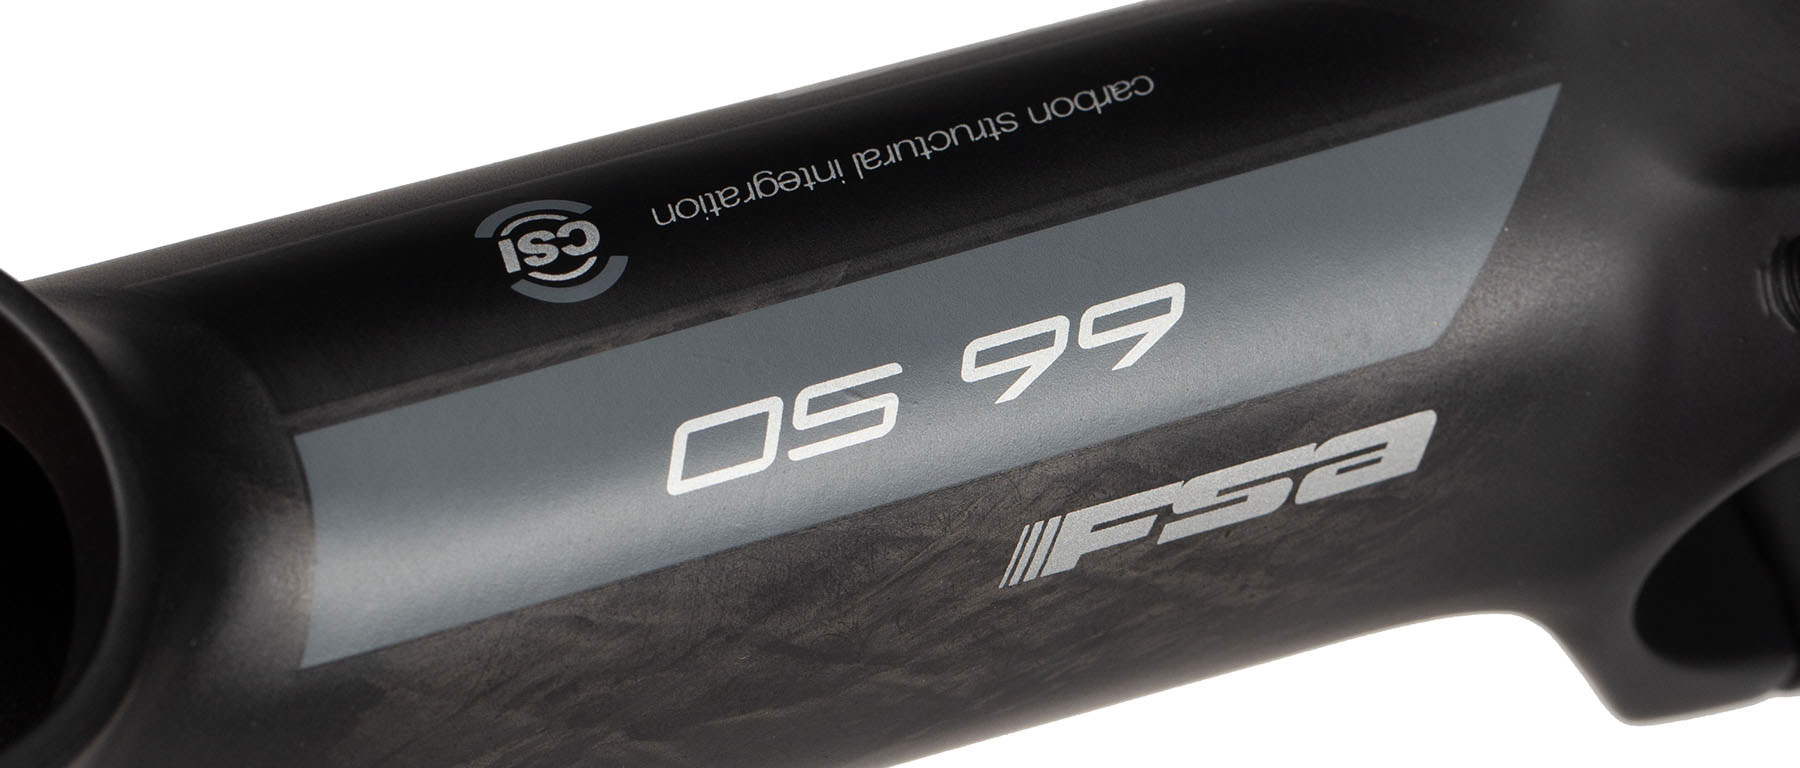 Full Speed Ahead K-Force OS-99 Carbon Stem